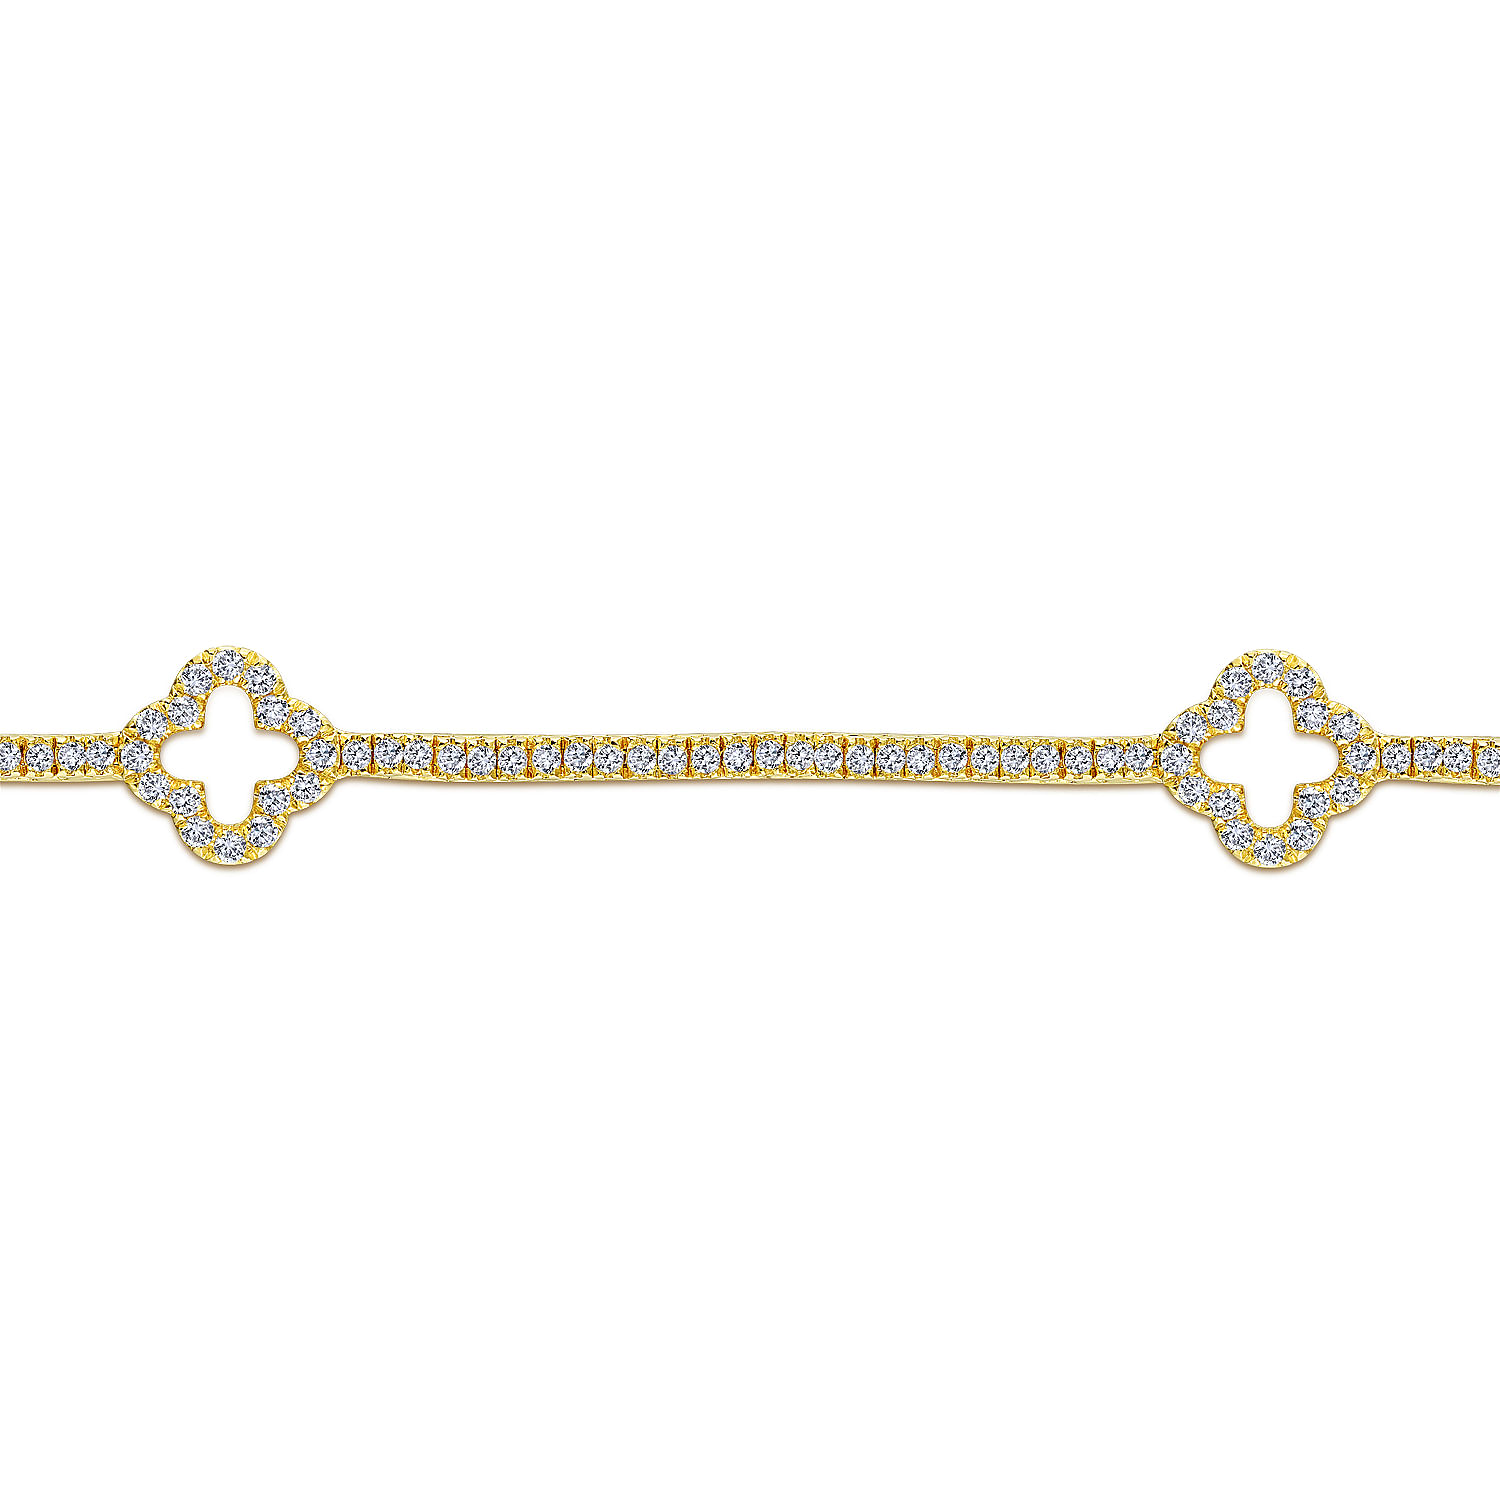 14K Yellow Gold Diamond Tennis Bracelet with Clover Stations